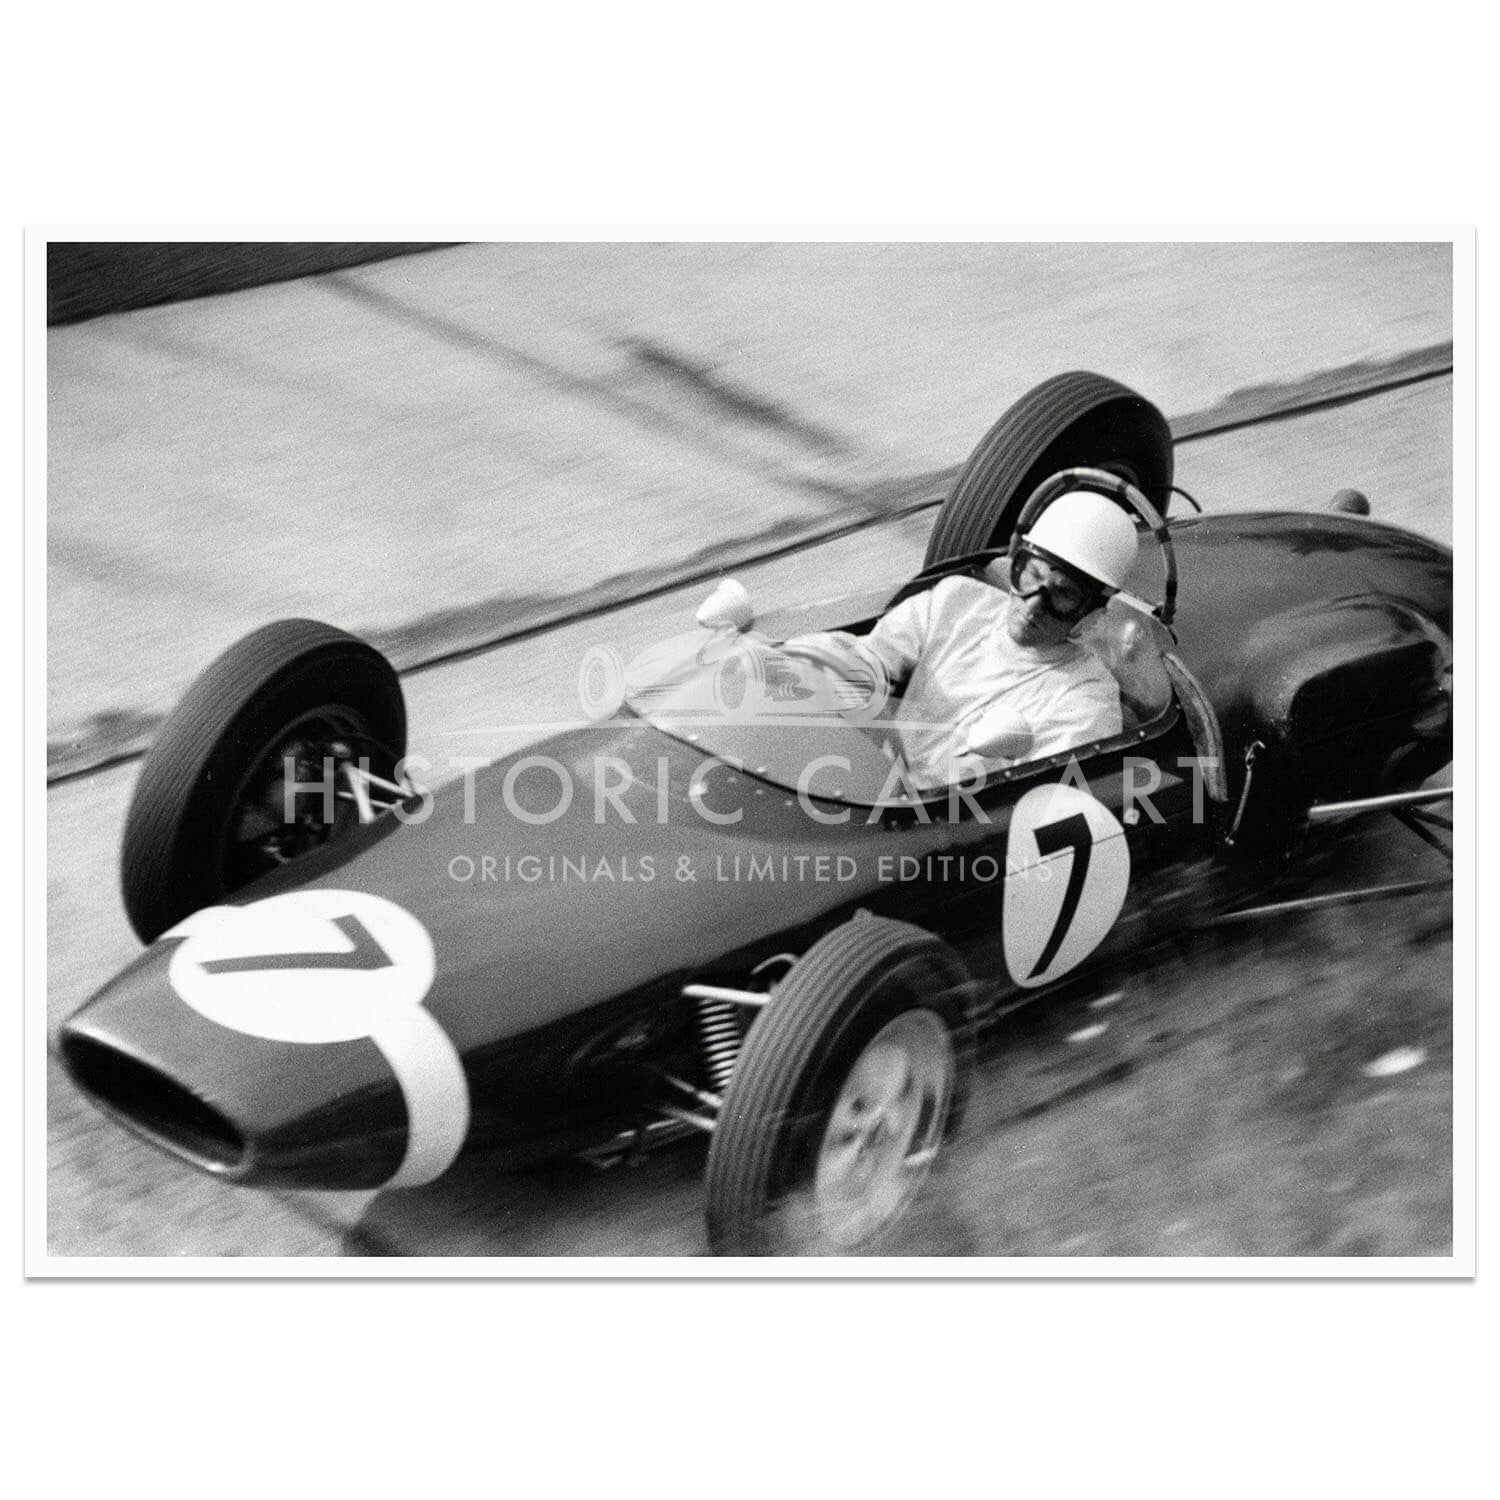 1961 German Grand Prix | Stirling Moss | Lotus 18/21 | Karussell | Photograph